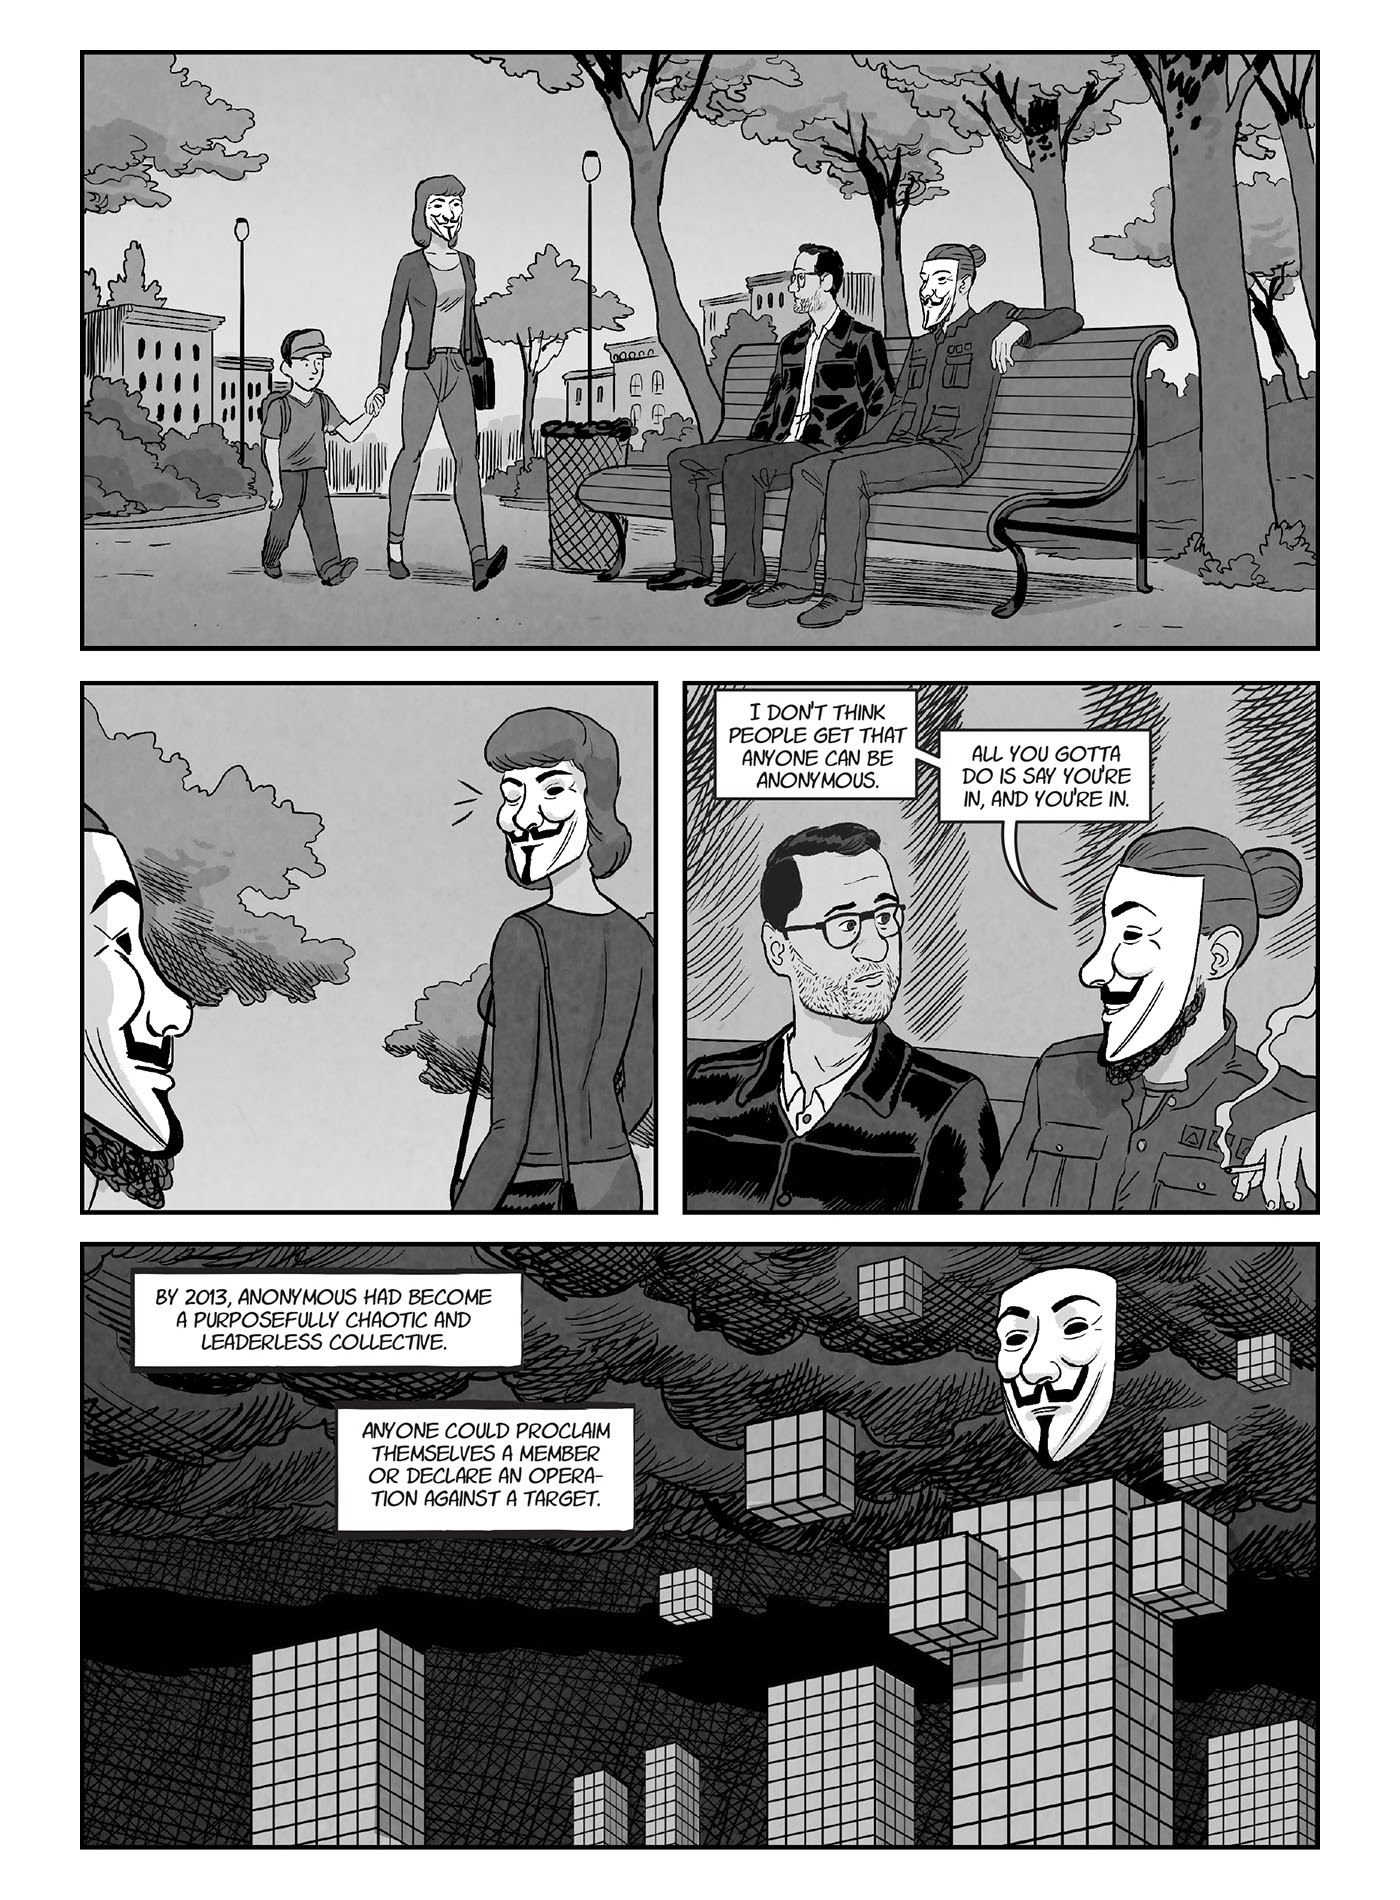 Read online A for Anonymous: How a Mysterious Hacker Collective Transformed the World comic -  Issue # TPB - 81